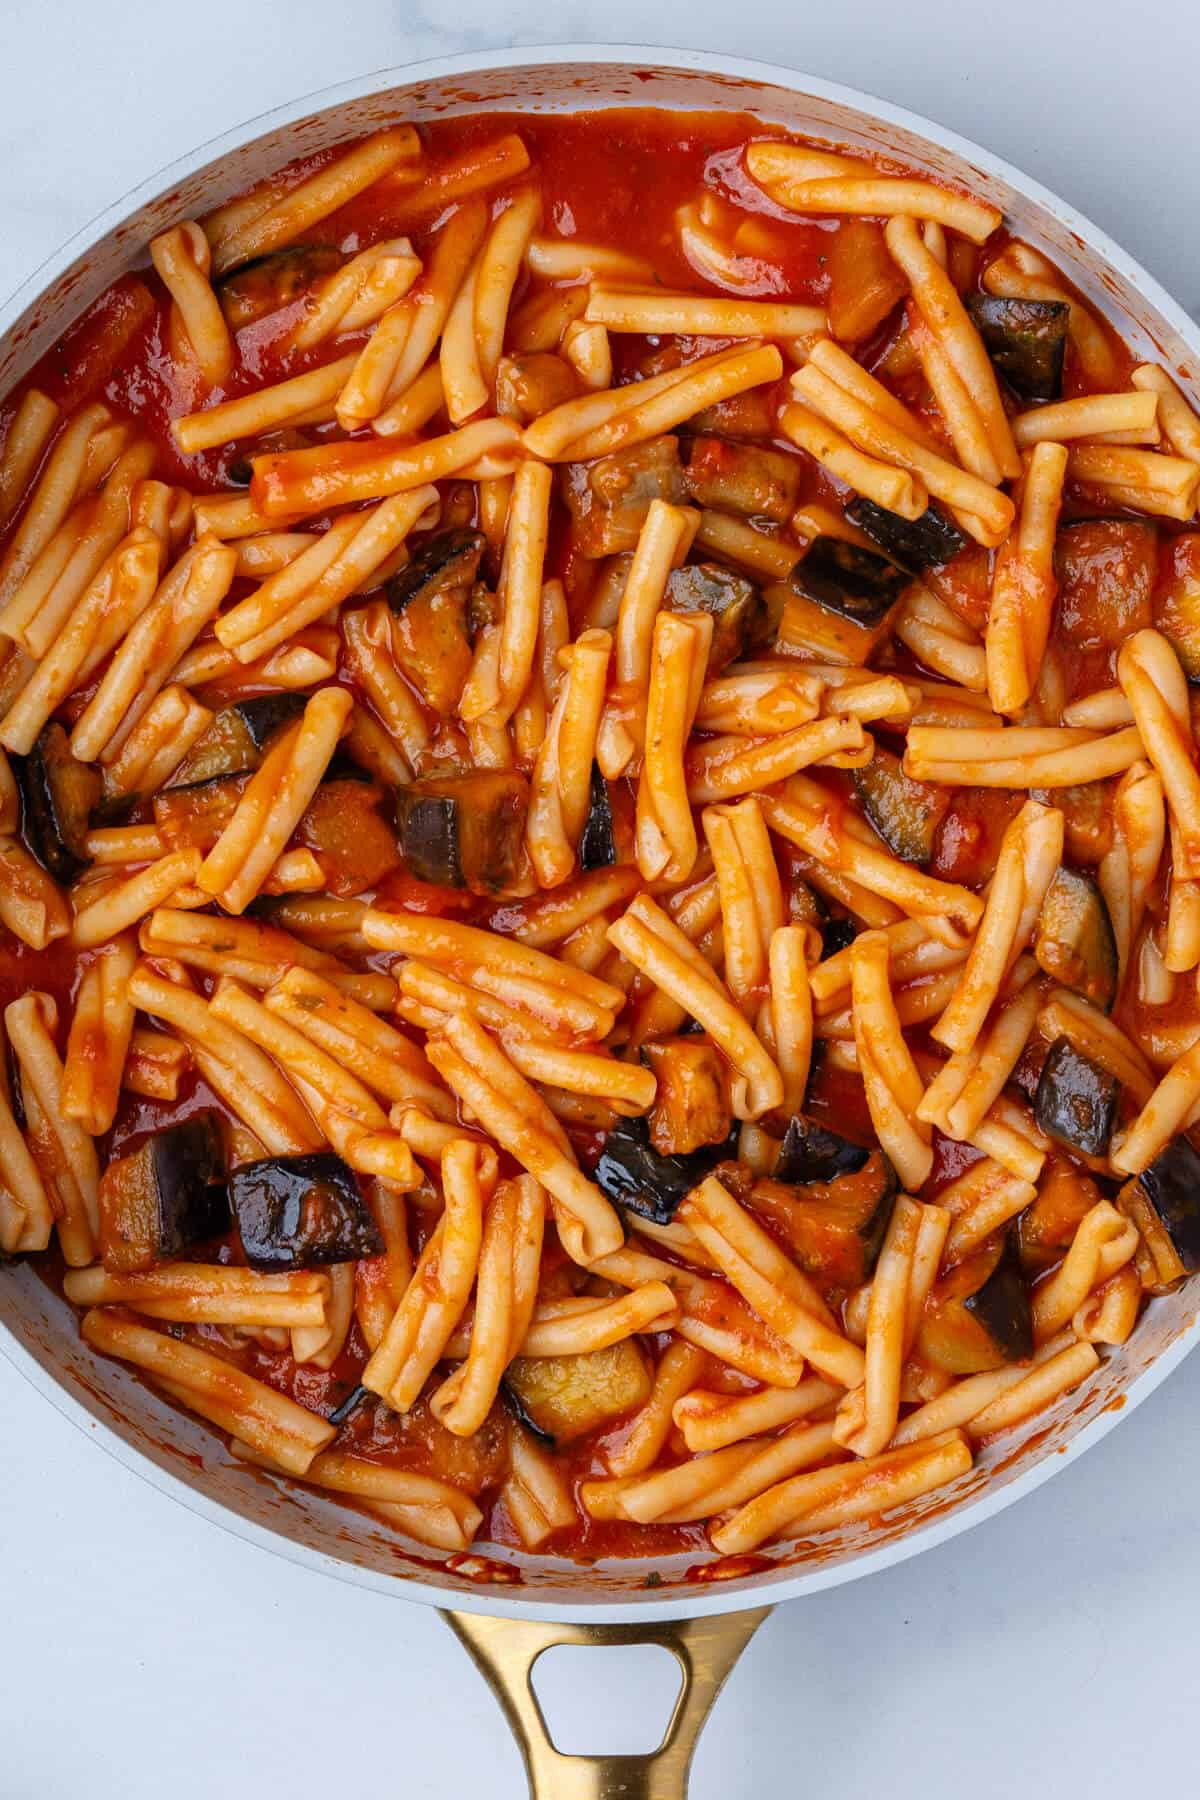 Cooked pasta with tomato sauce and eggplants in a pan